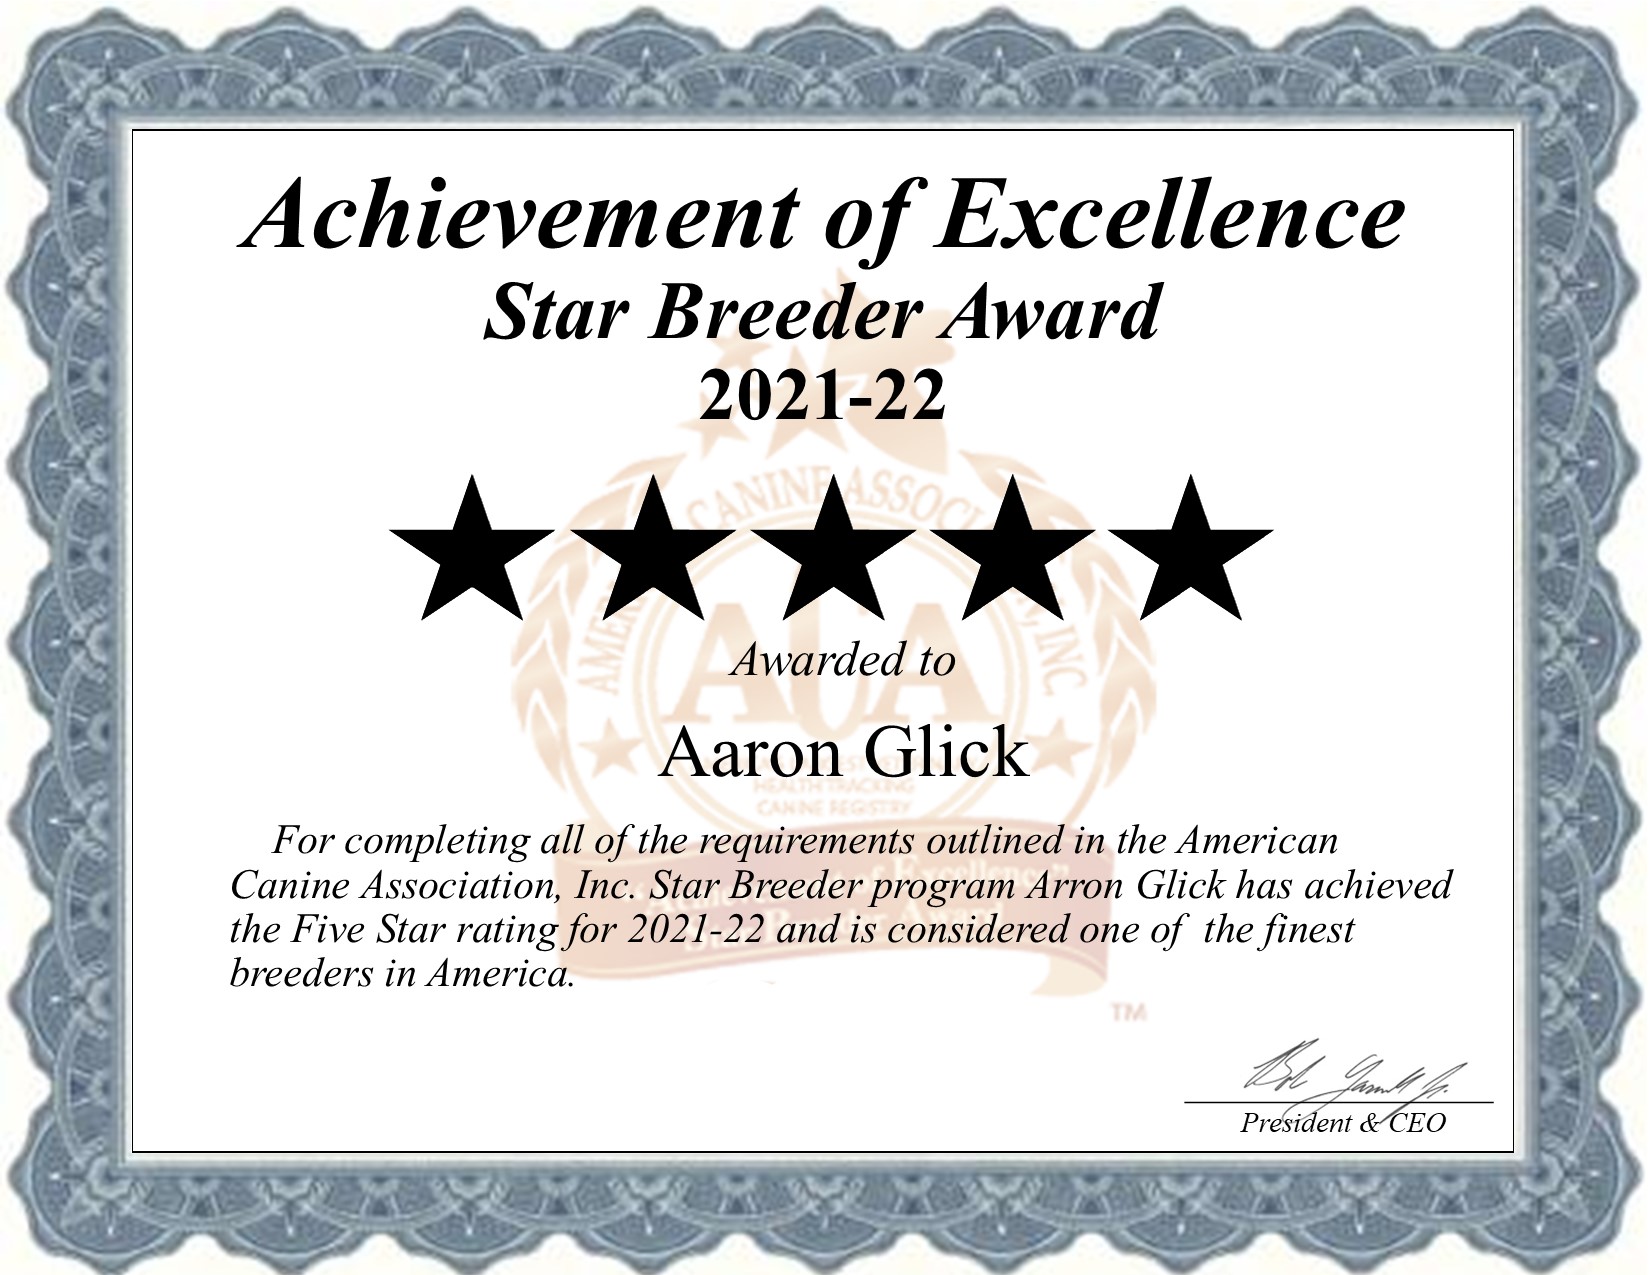 Aaron, Glick, dog, breeder, star, certificate, Aaron-Glick, Coatesville, PA, Pennsylvania, puppy, dog, kennels, mill, puppymill, usda, 5-star, aca, ica, registered, Doodle